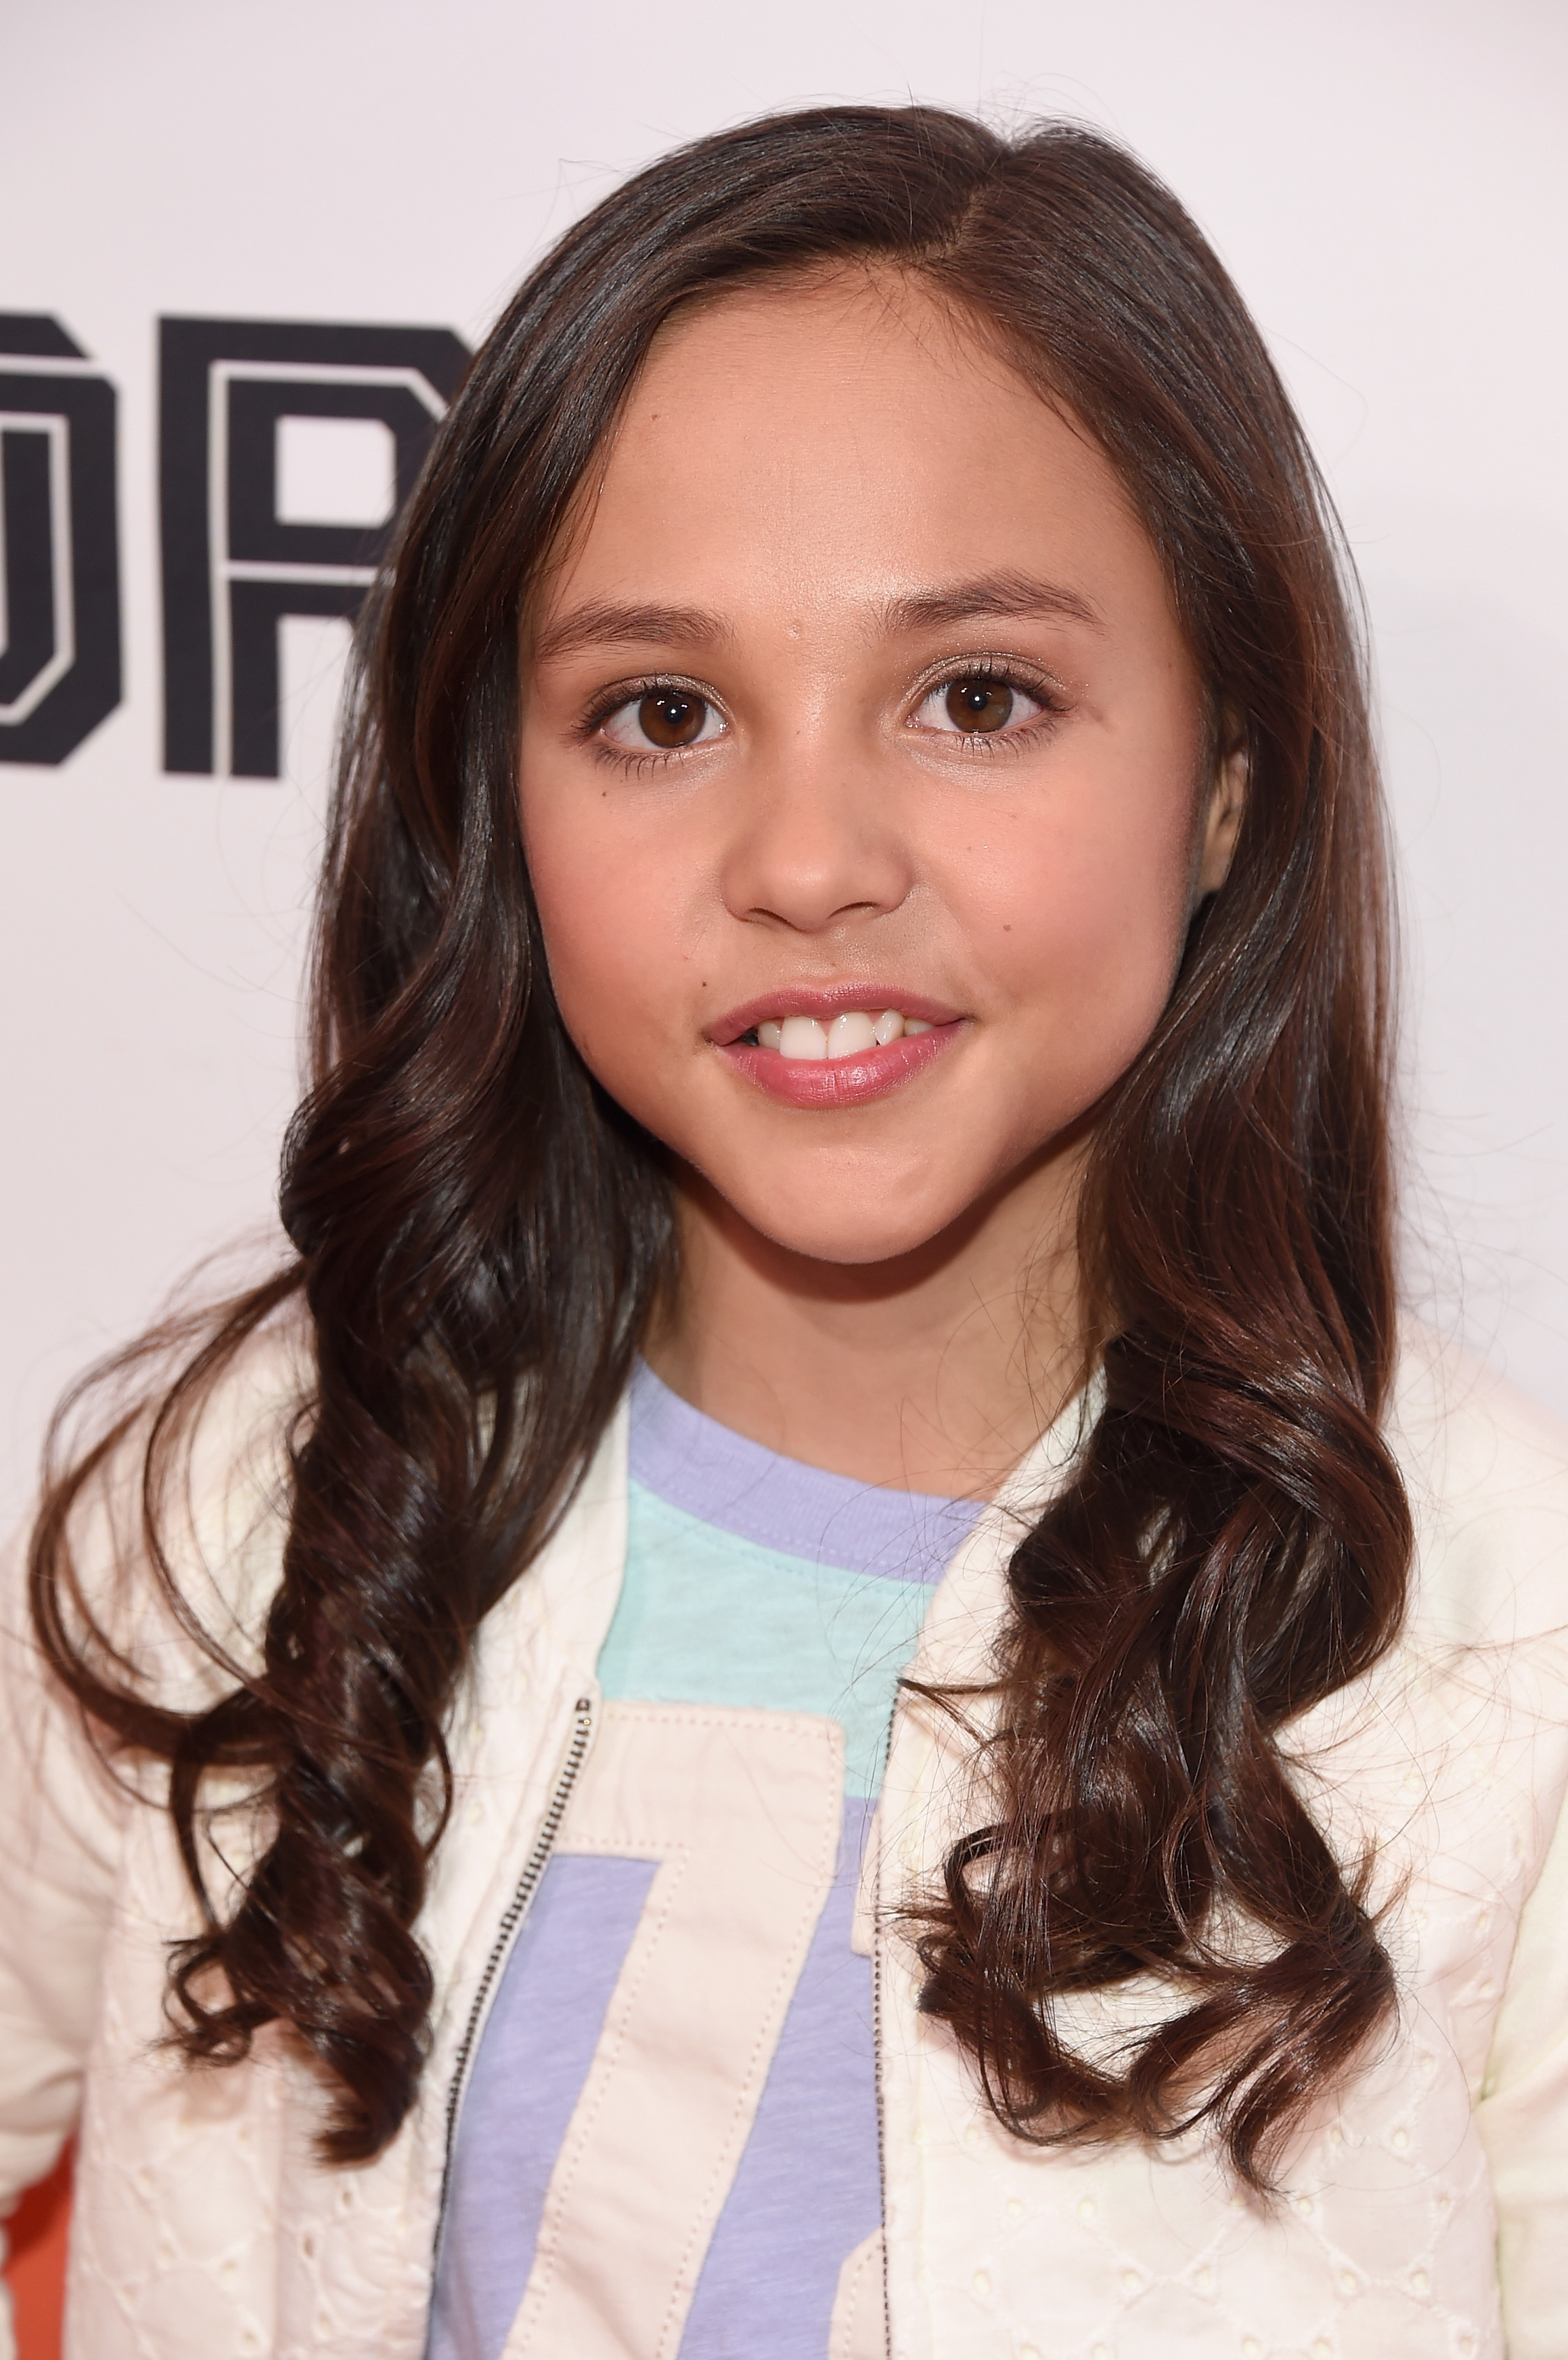 General photo of Breanna Yde